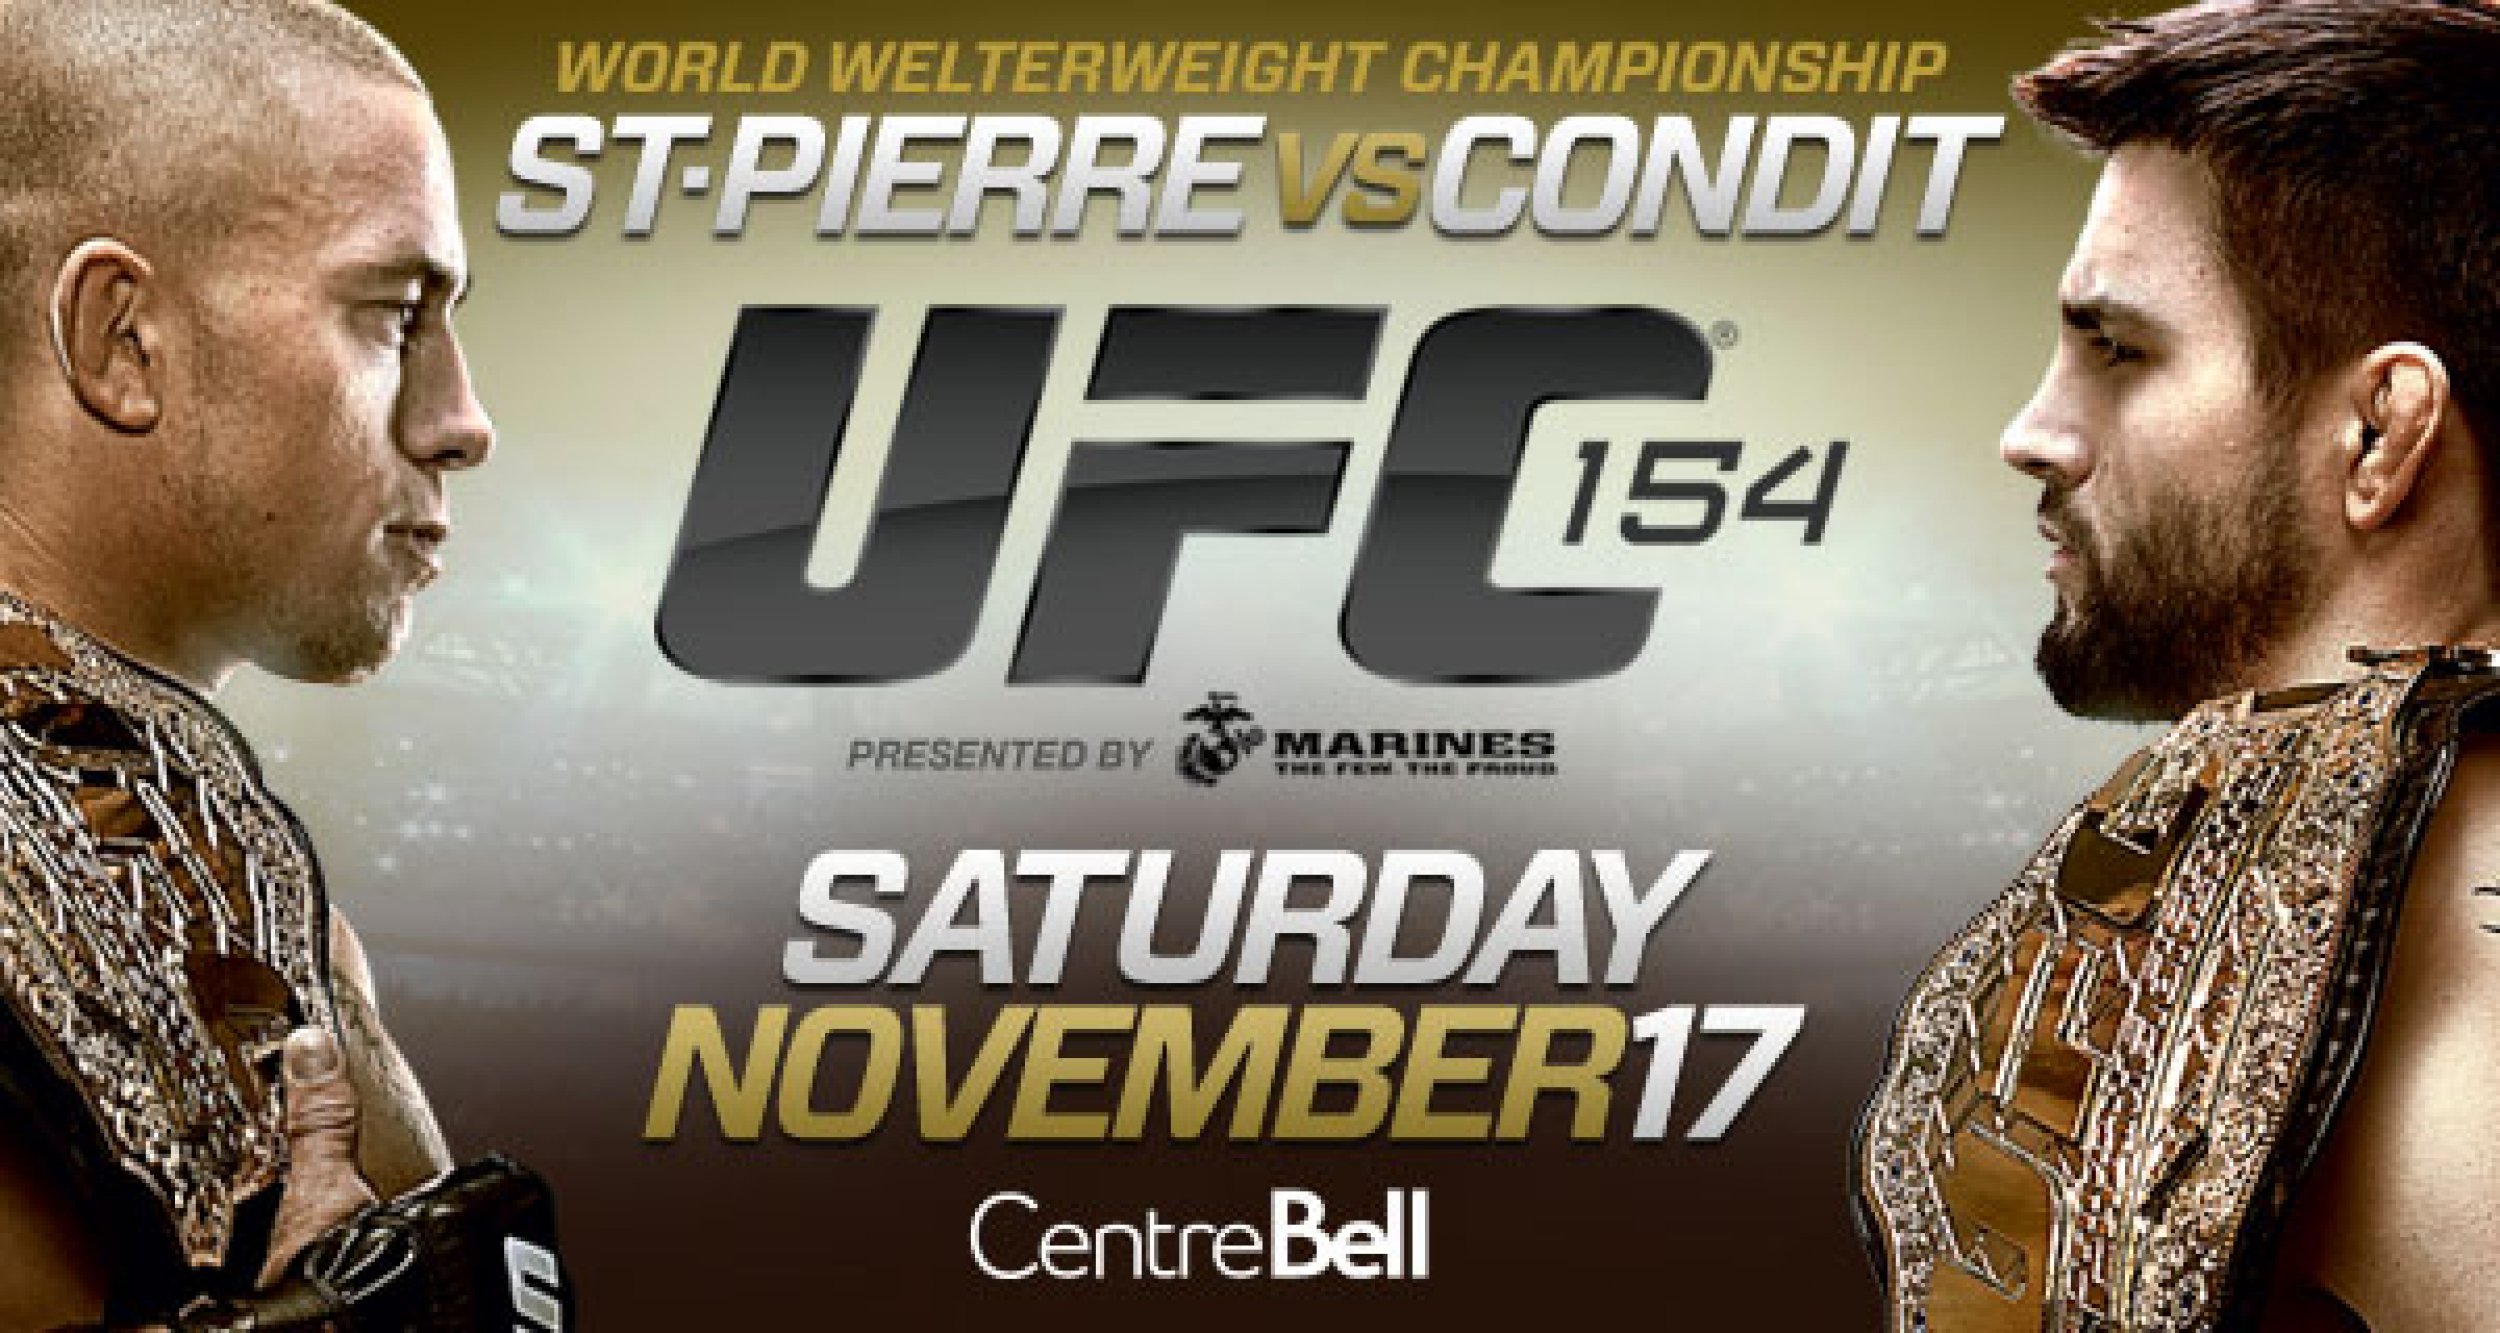 St. Pierre and Condit